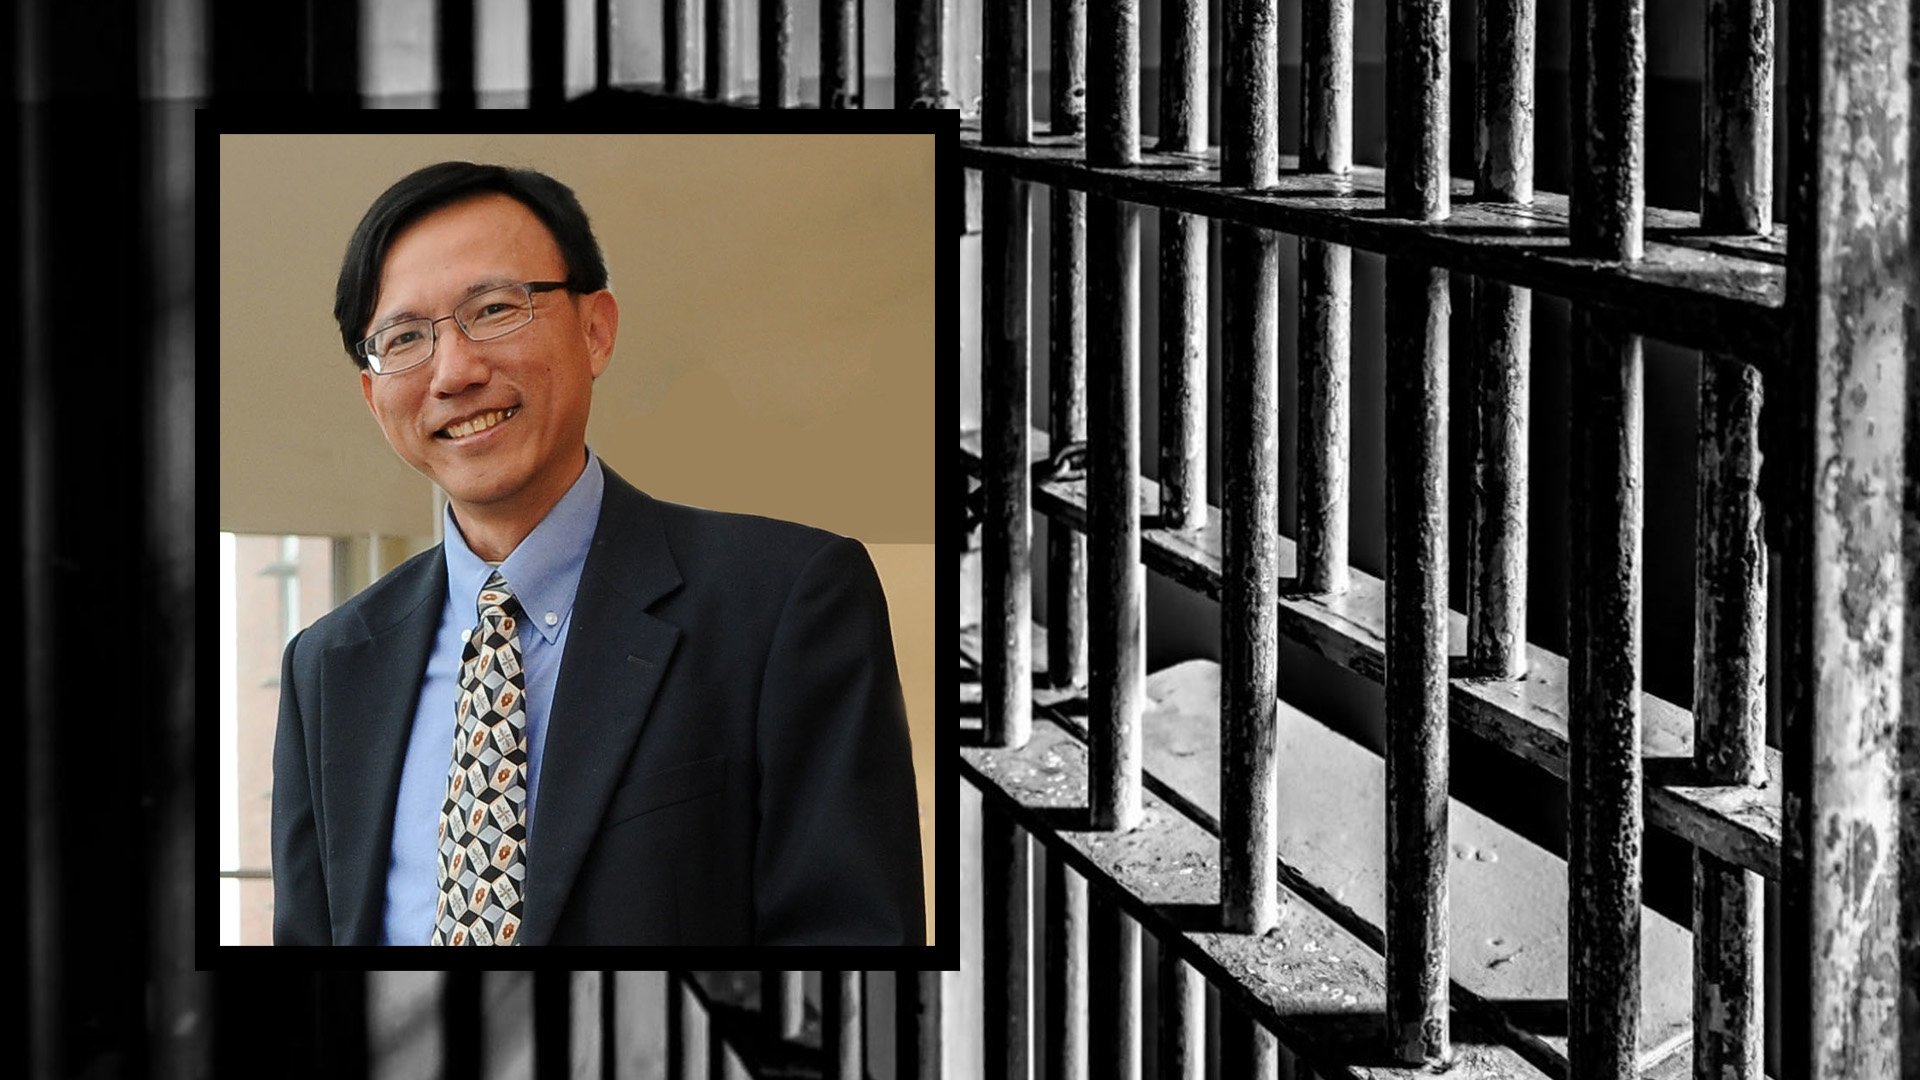 A National Oceanic and Atmospheric Administration scientist, Yifei "Philip" Chu, 57, of Ypsilanti, Michigan, was charged on Monday, Oct. 24, 2022, with \ making false statements concerning his contacts with the Taiwanese Navy and falsifying records in a federal investigation related to his application for a security clearance. Coffee or Die Magazine composite.